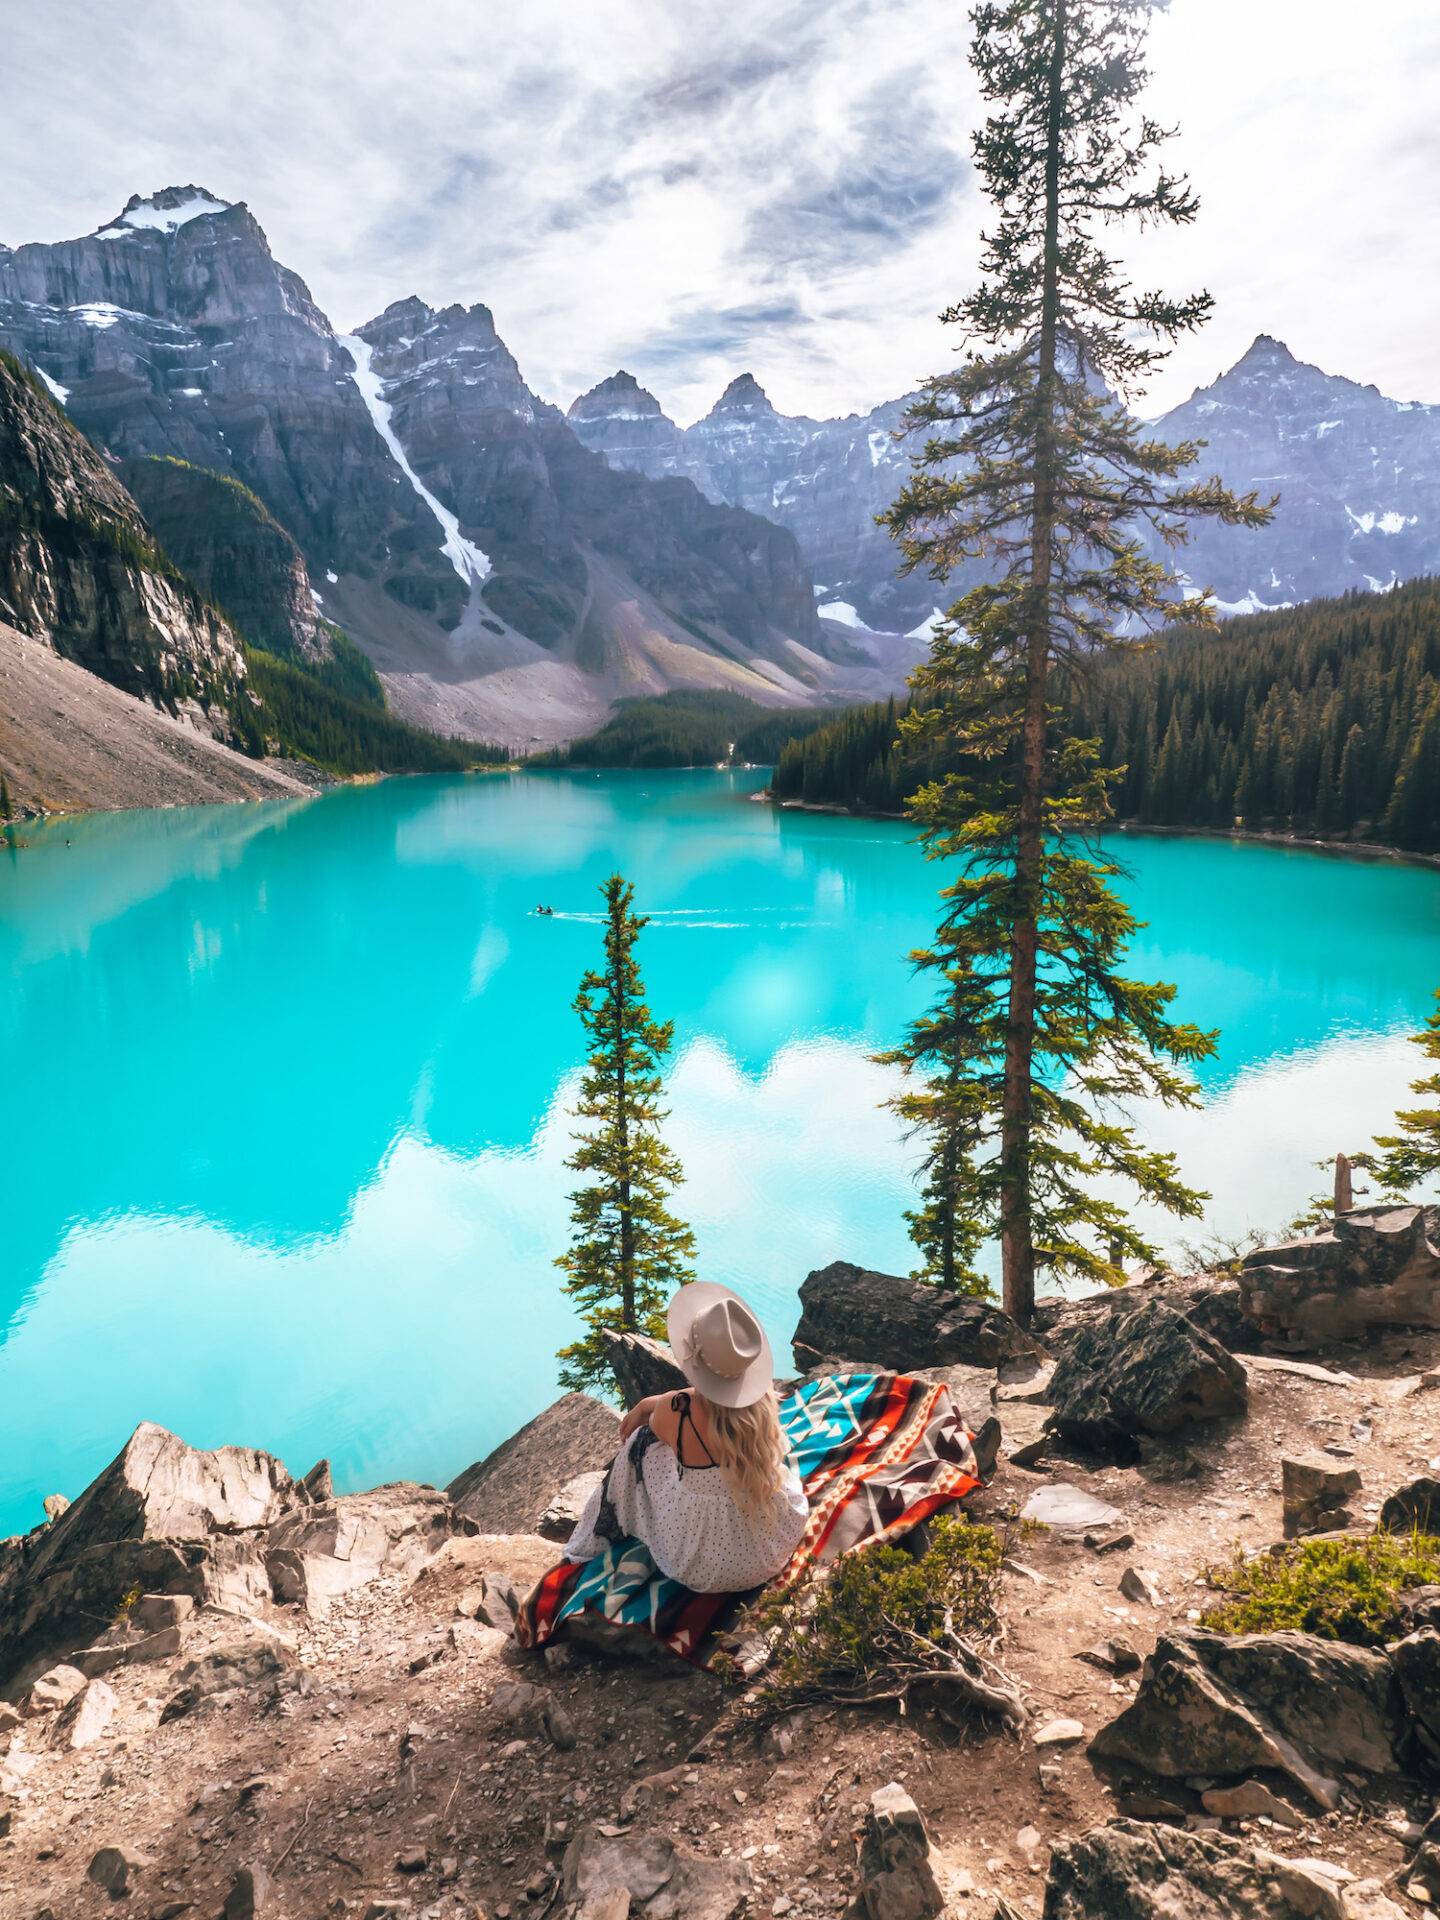 Visiting Banff National Park soon? Don't miss this guide of the 50 best things to in Banff for every kind of traveler! I recently spent 8 days exploring the area and took notes along the way so I could write you the most comprehensive guide possible. This guide includes all the top attractions, hikes, restaurants, and sights you definitely won't want to miss when you visit Banff National Park. I also include any tips you might need when visiting the area! Pictured here: Moraine Lake